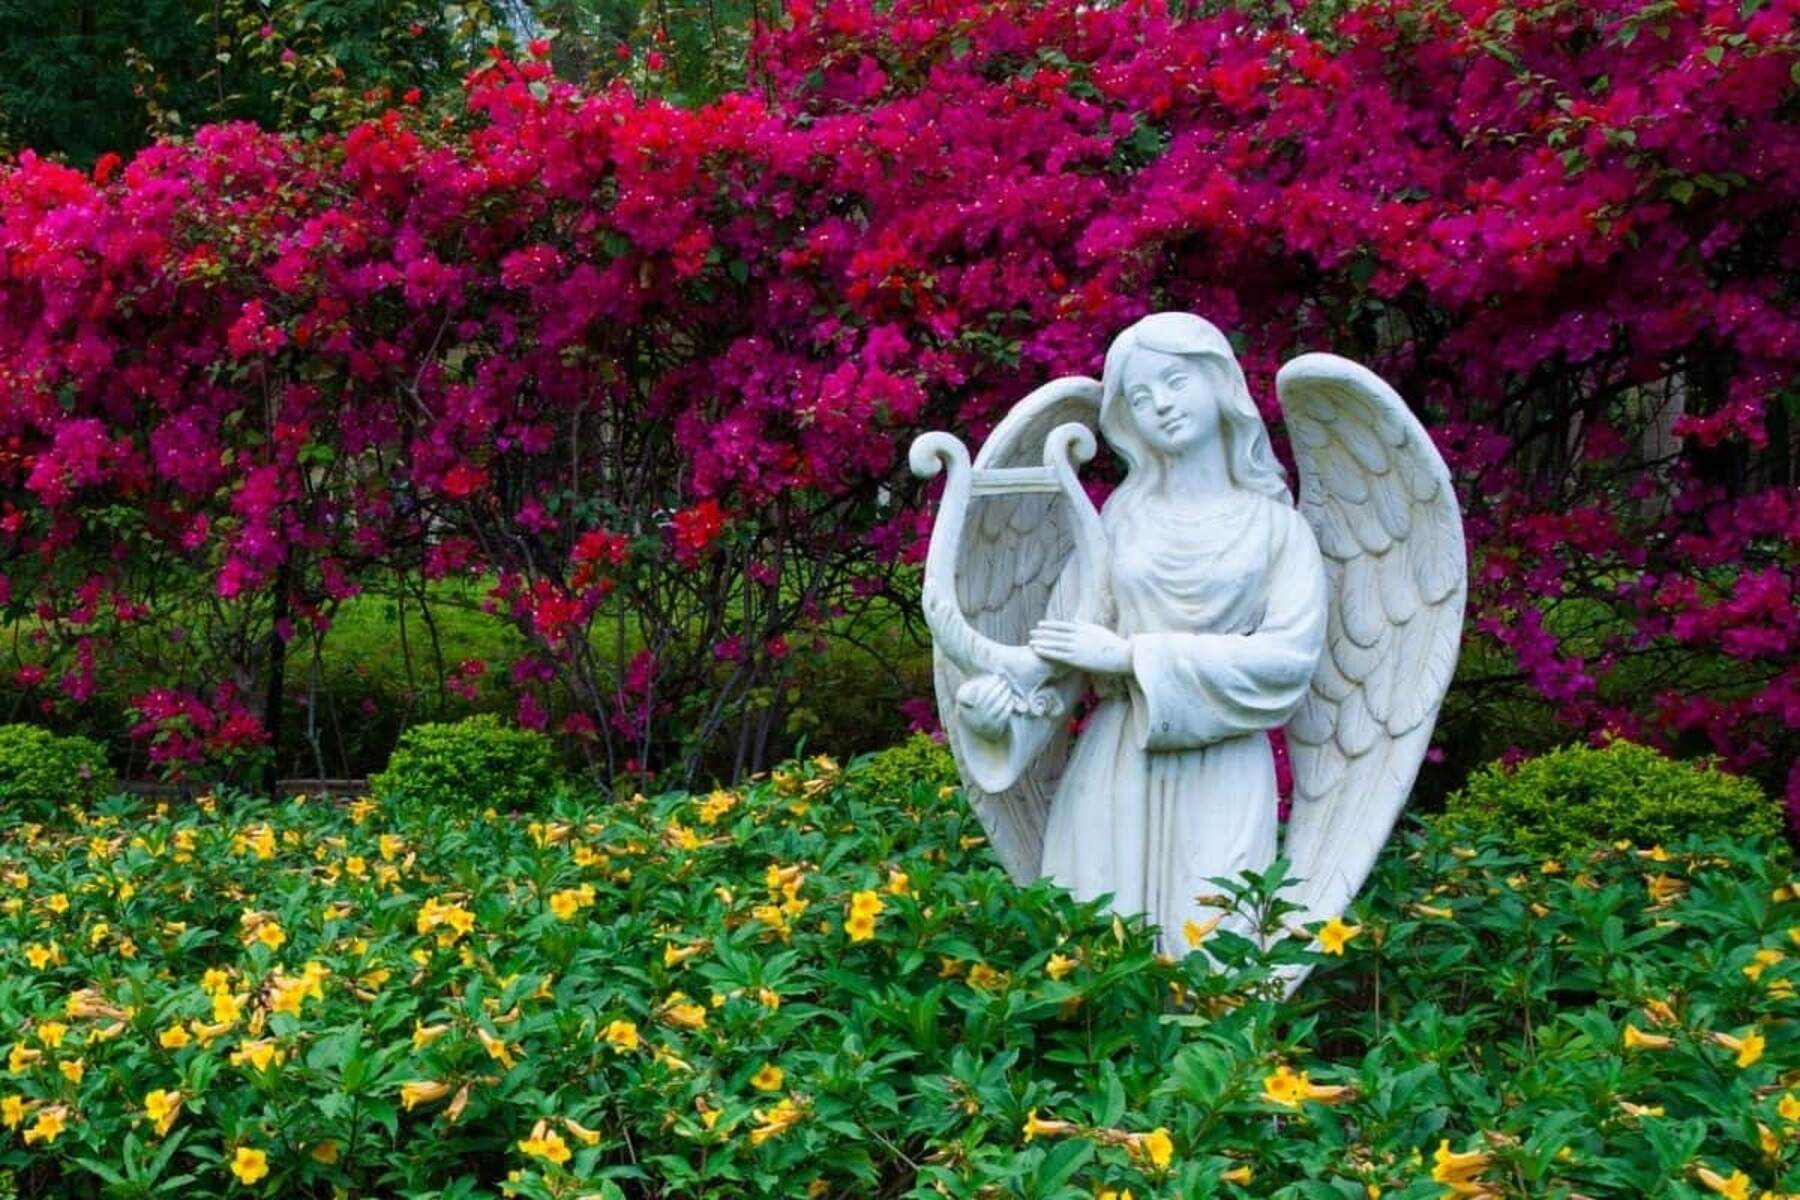 Where Can You Find Angelic Sculpture?